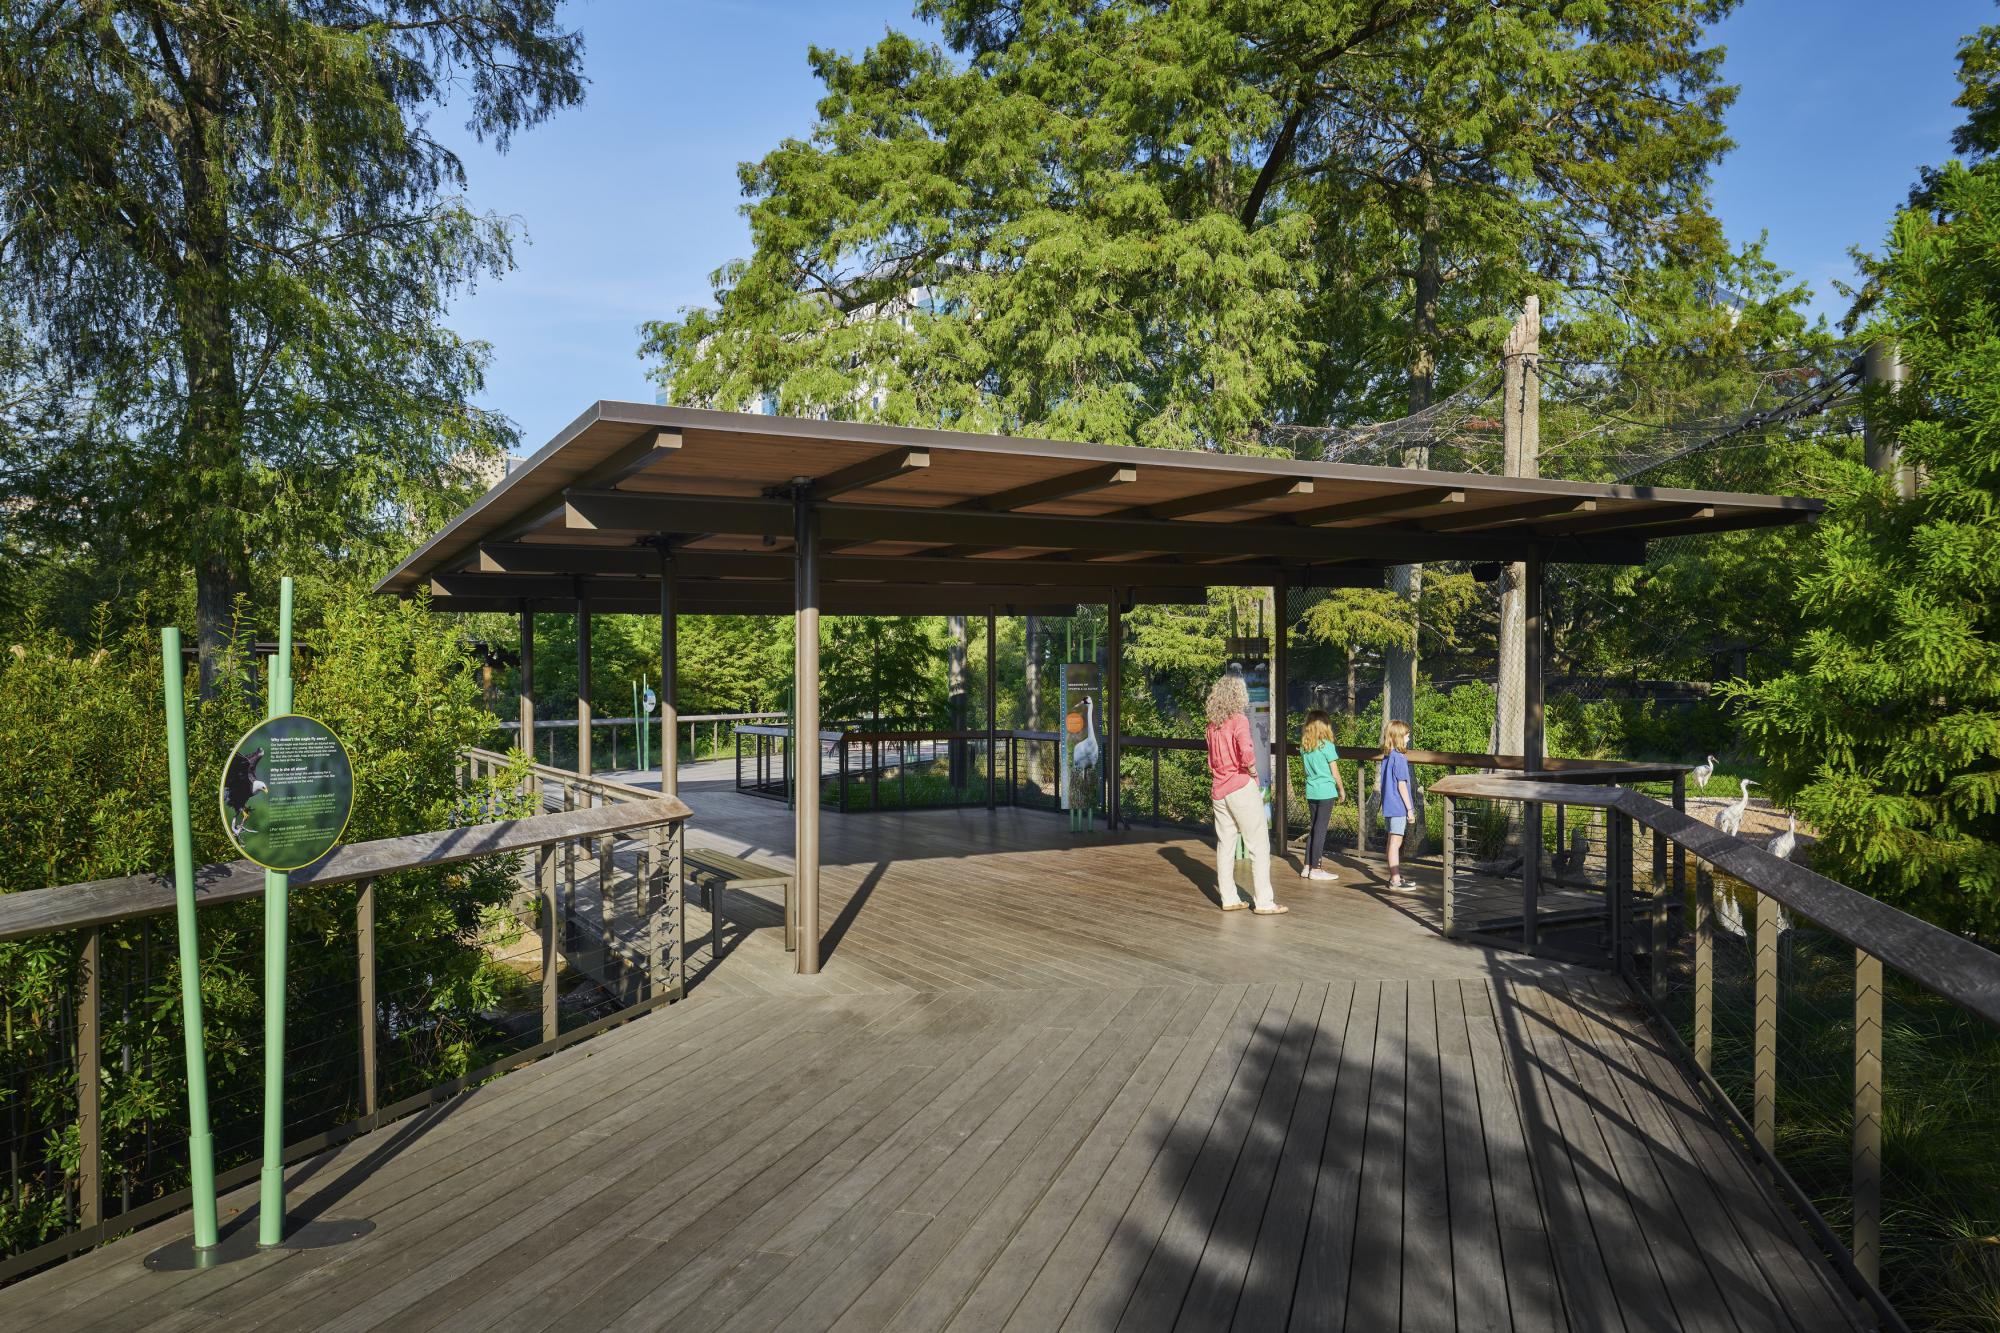 A redesigned front entrance, Cypress Circle Cafe sited along the Zoo’s new multi-species Texas Wetlands habitat creates a new iconic identity and positions the zoo as leaders in conservation and education. Green Restaurant Certified.